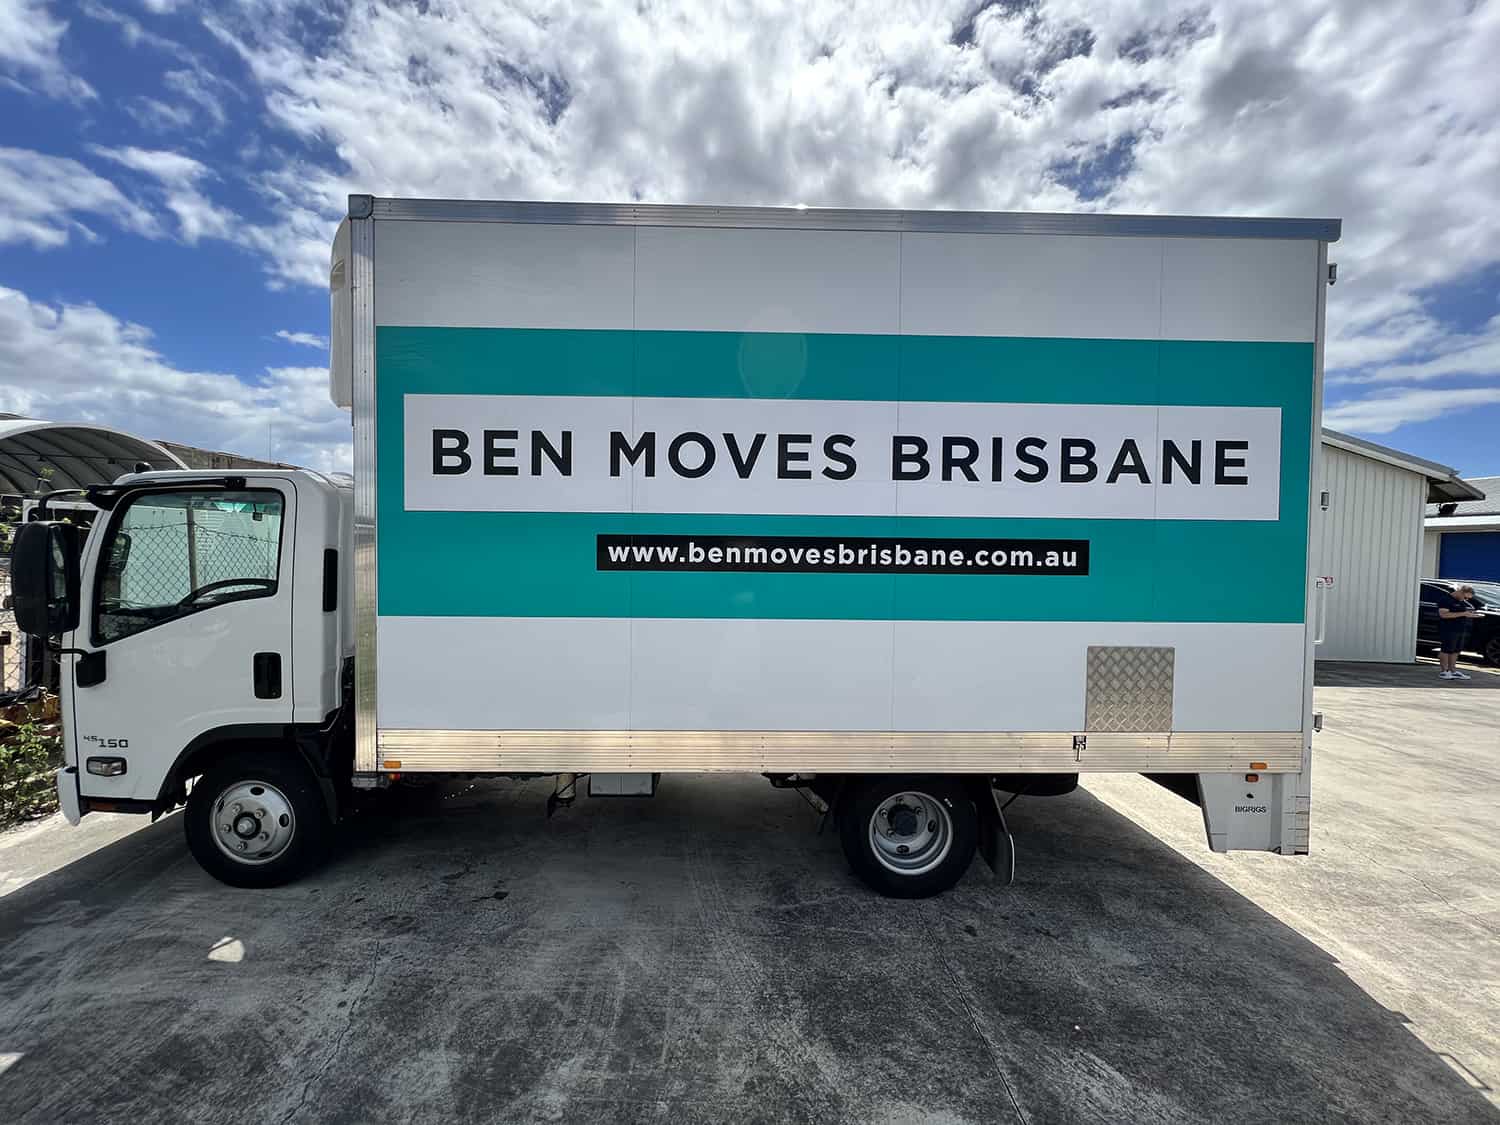 Moving truck with 'Ben Moves Brisbane' written on the side